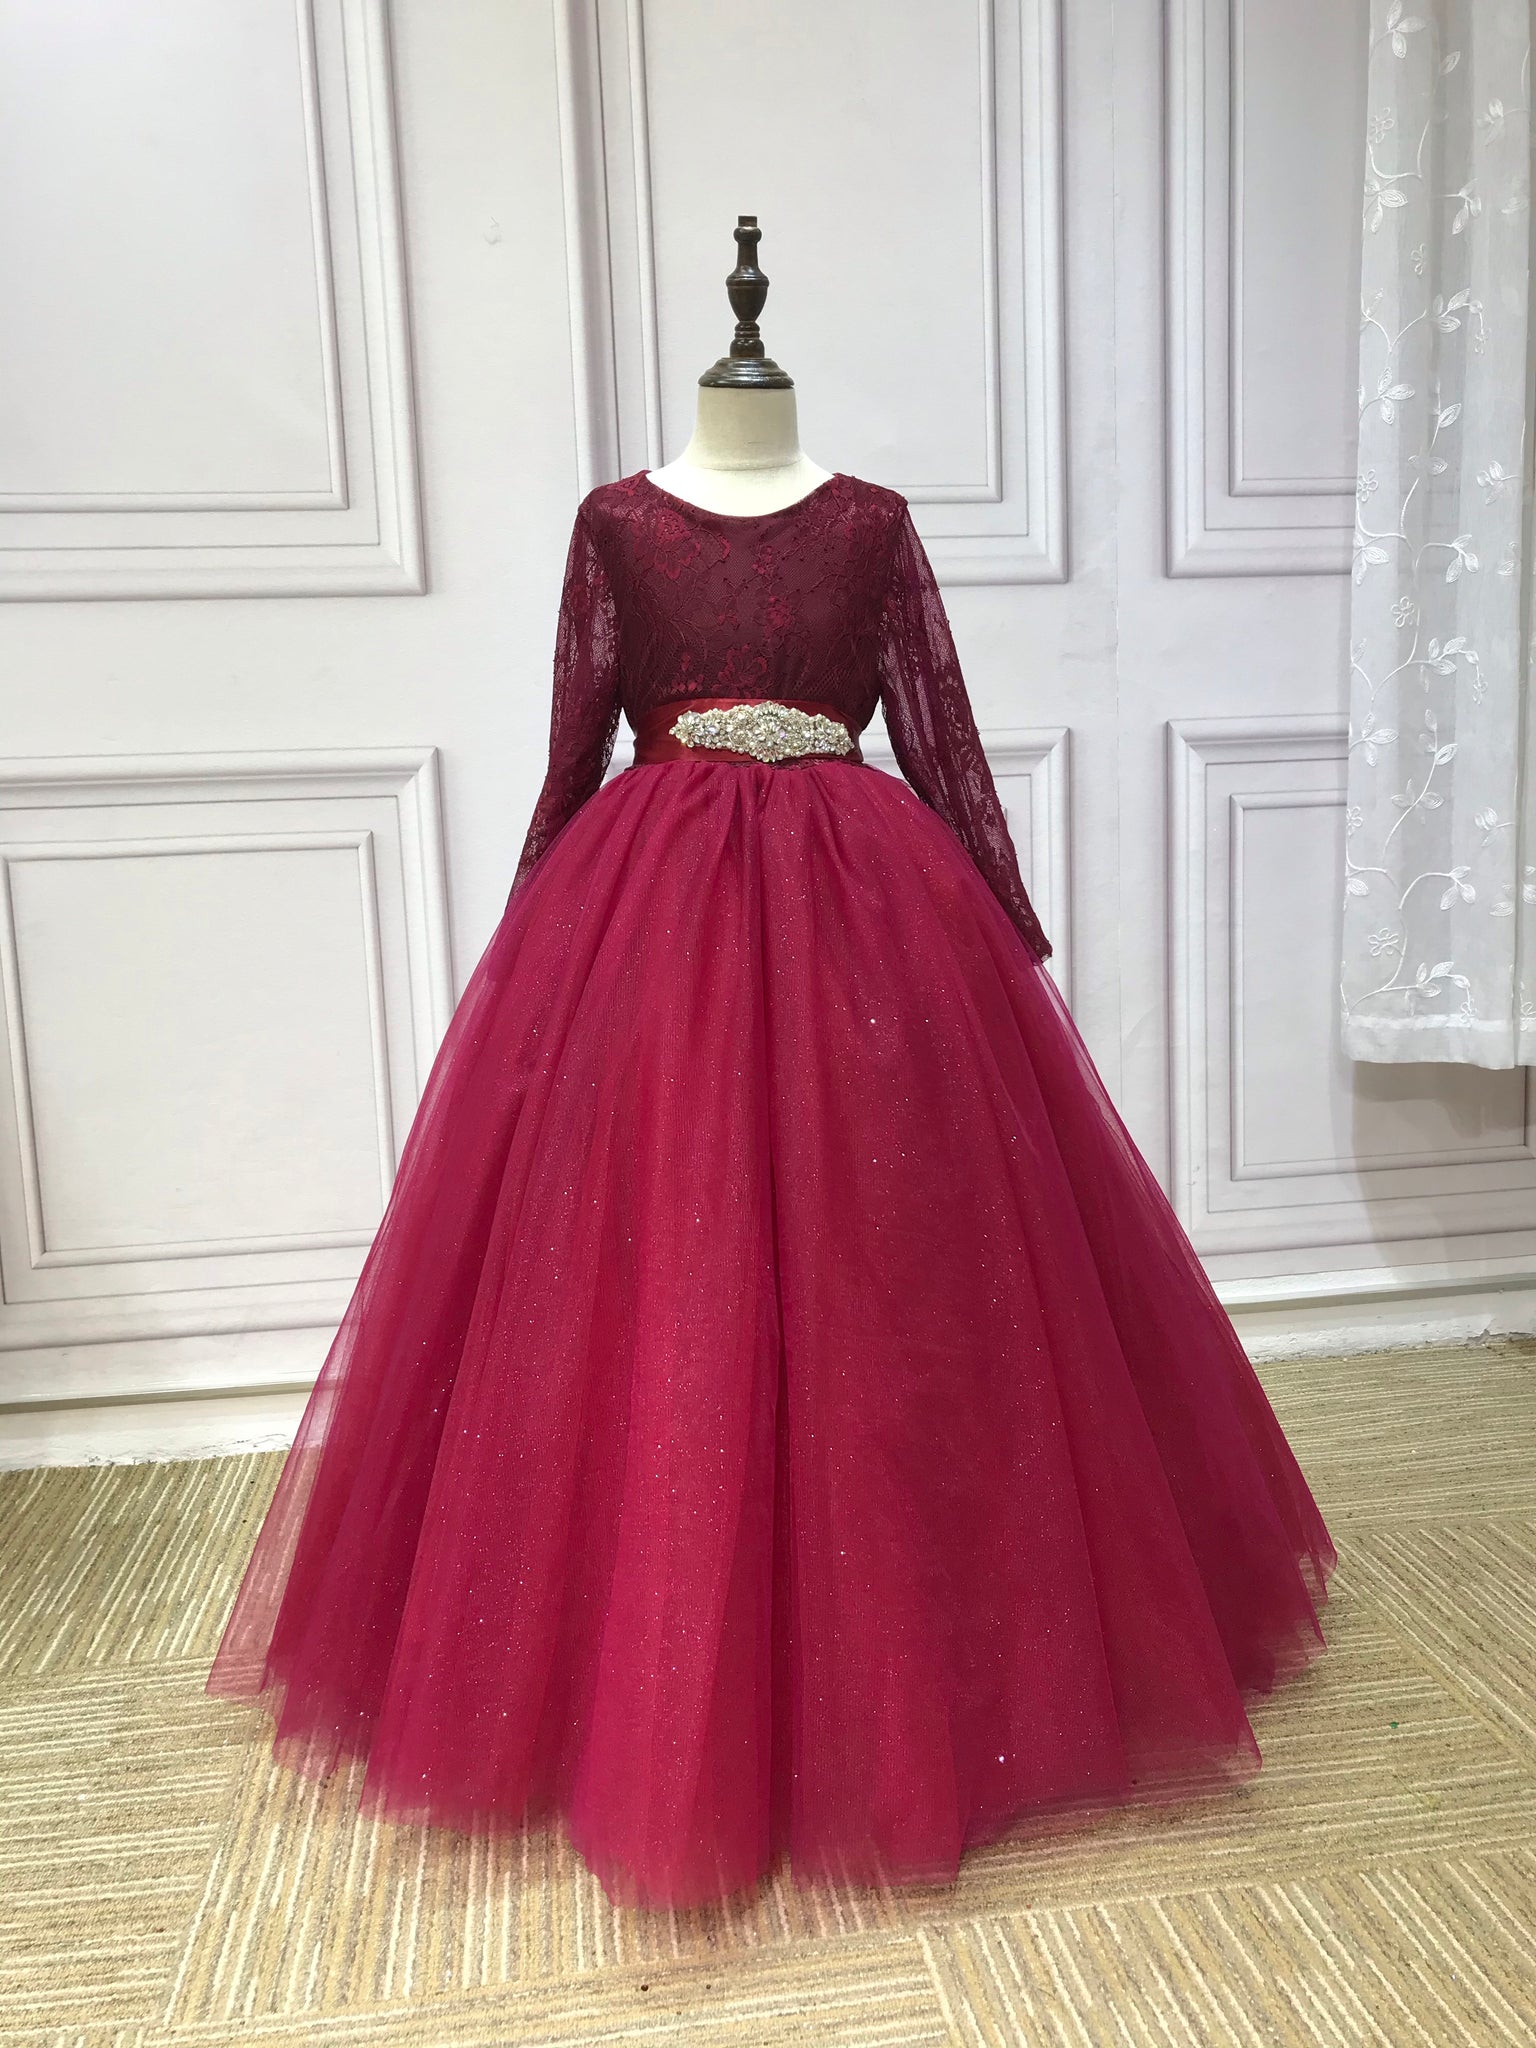 Princess Ink Lace Flower Princess Dress With Sheer Neckline And Ball Gown  Style Perfect For Weddings, Communion, Pageants, Birthdays, And Cocktails  Affordable Little Girl Ball Dresses 2023 From Weddingshop888, $66.06 |  DHgate.Com